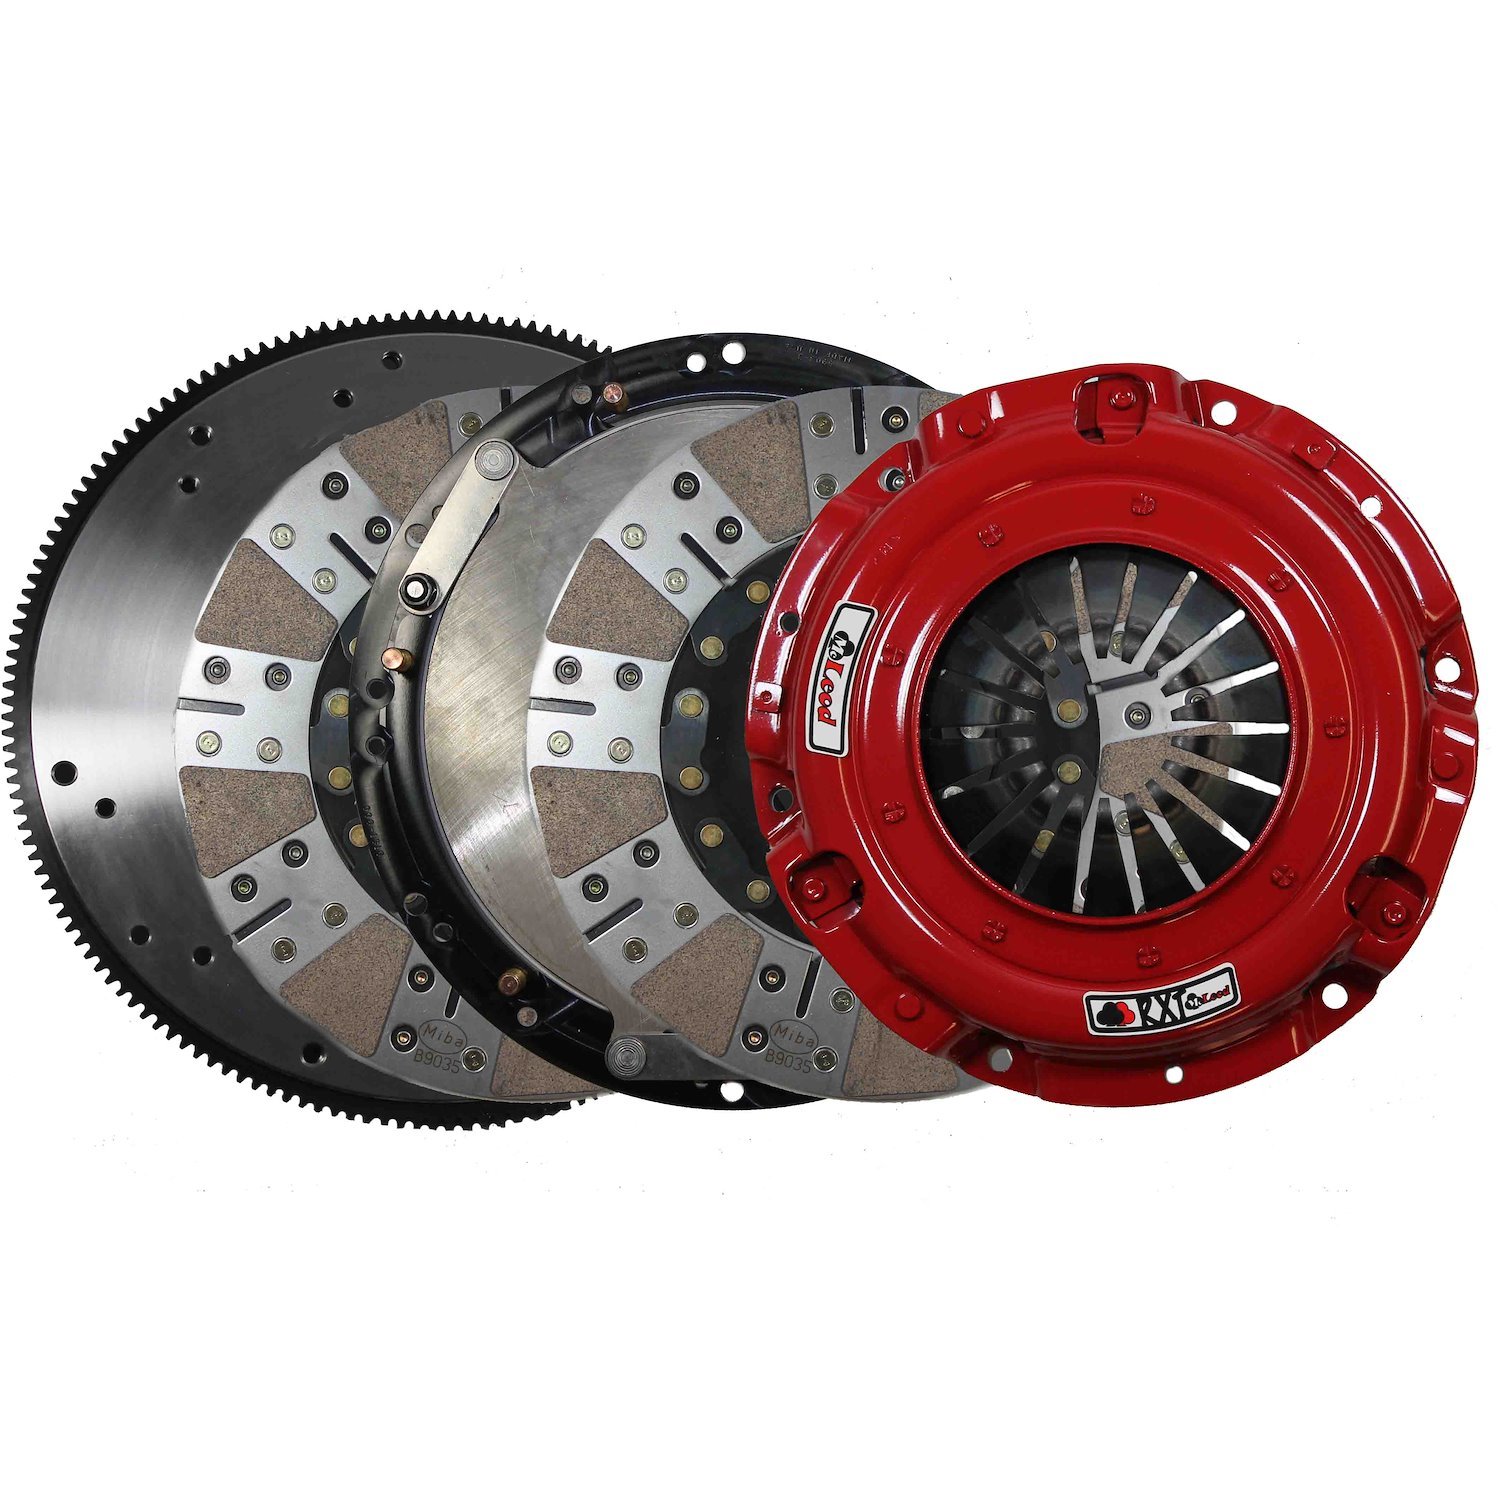 Power Pack RST Twin Disc Clutch Kit [2011-2017 Ford Coyote 5.0L V8]